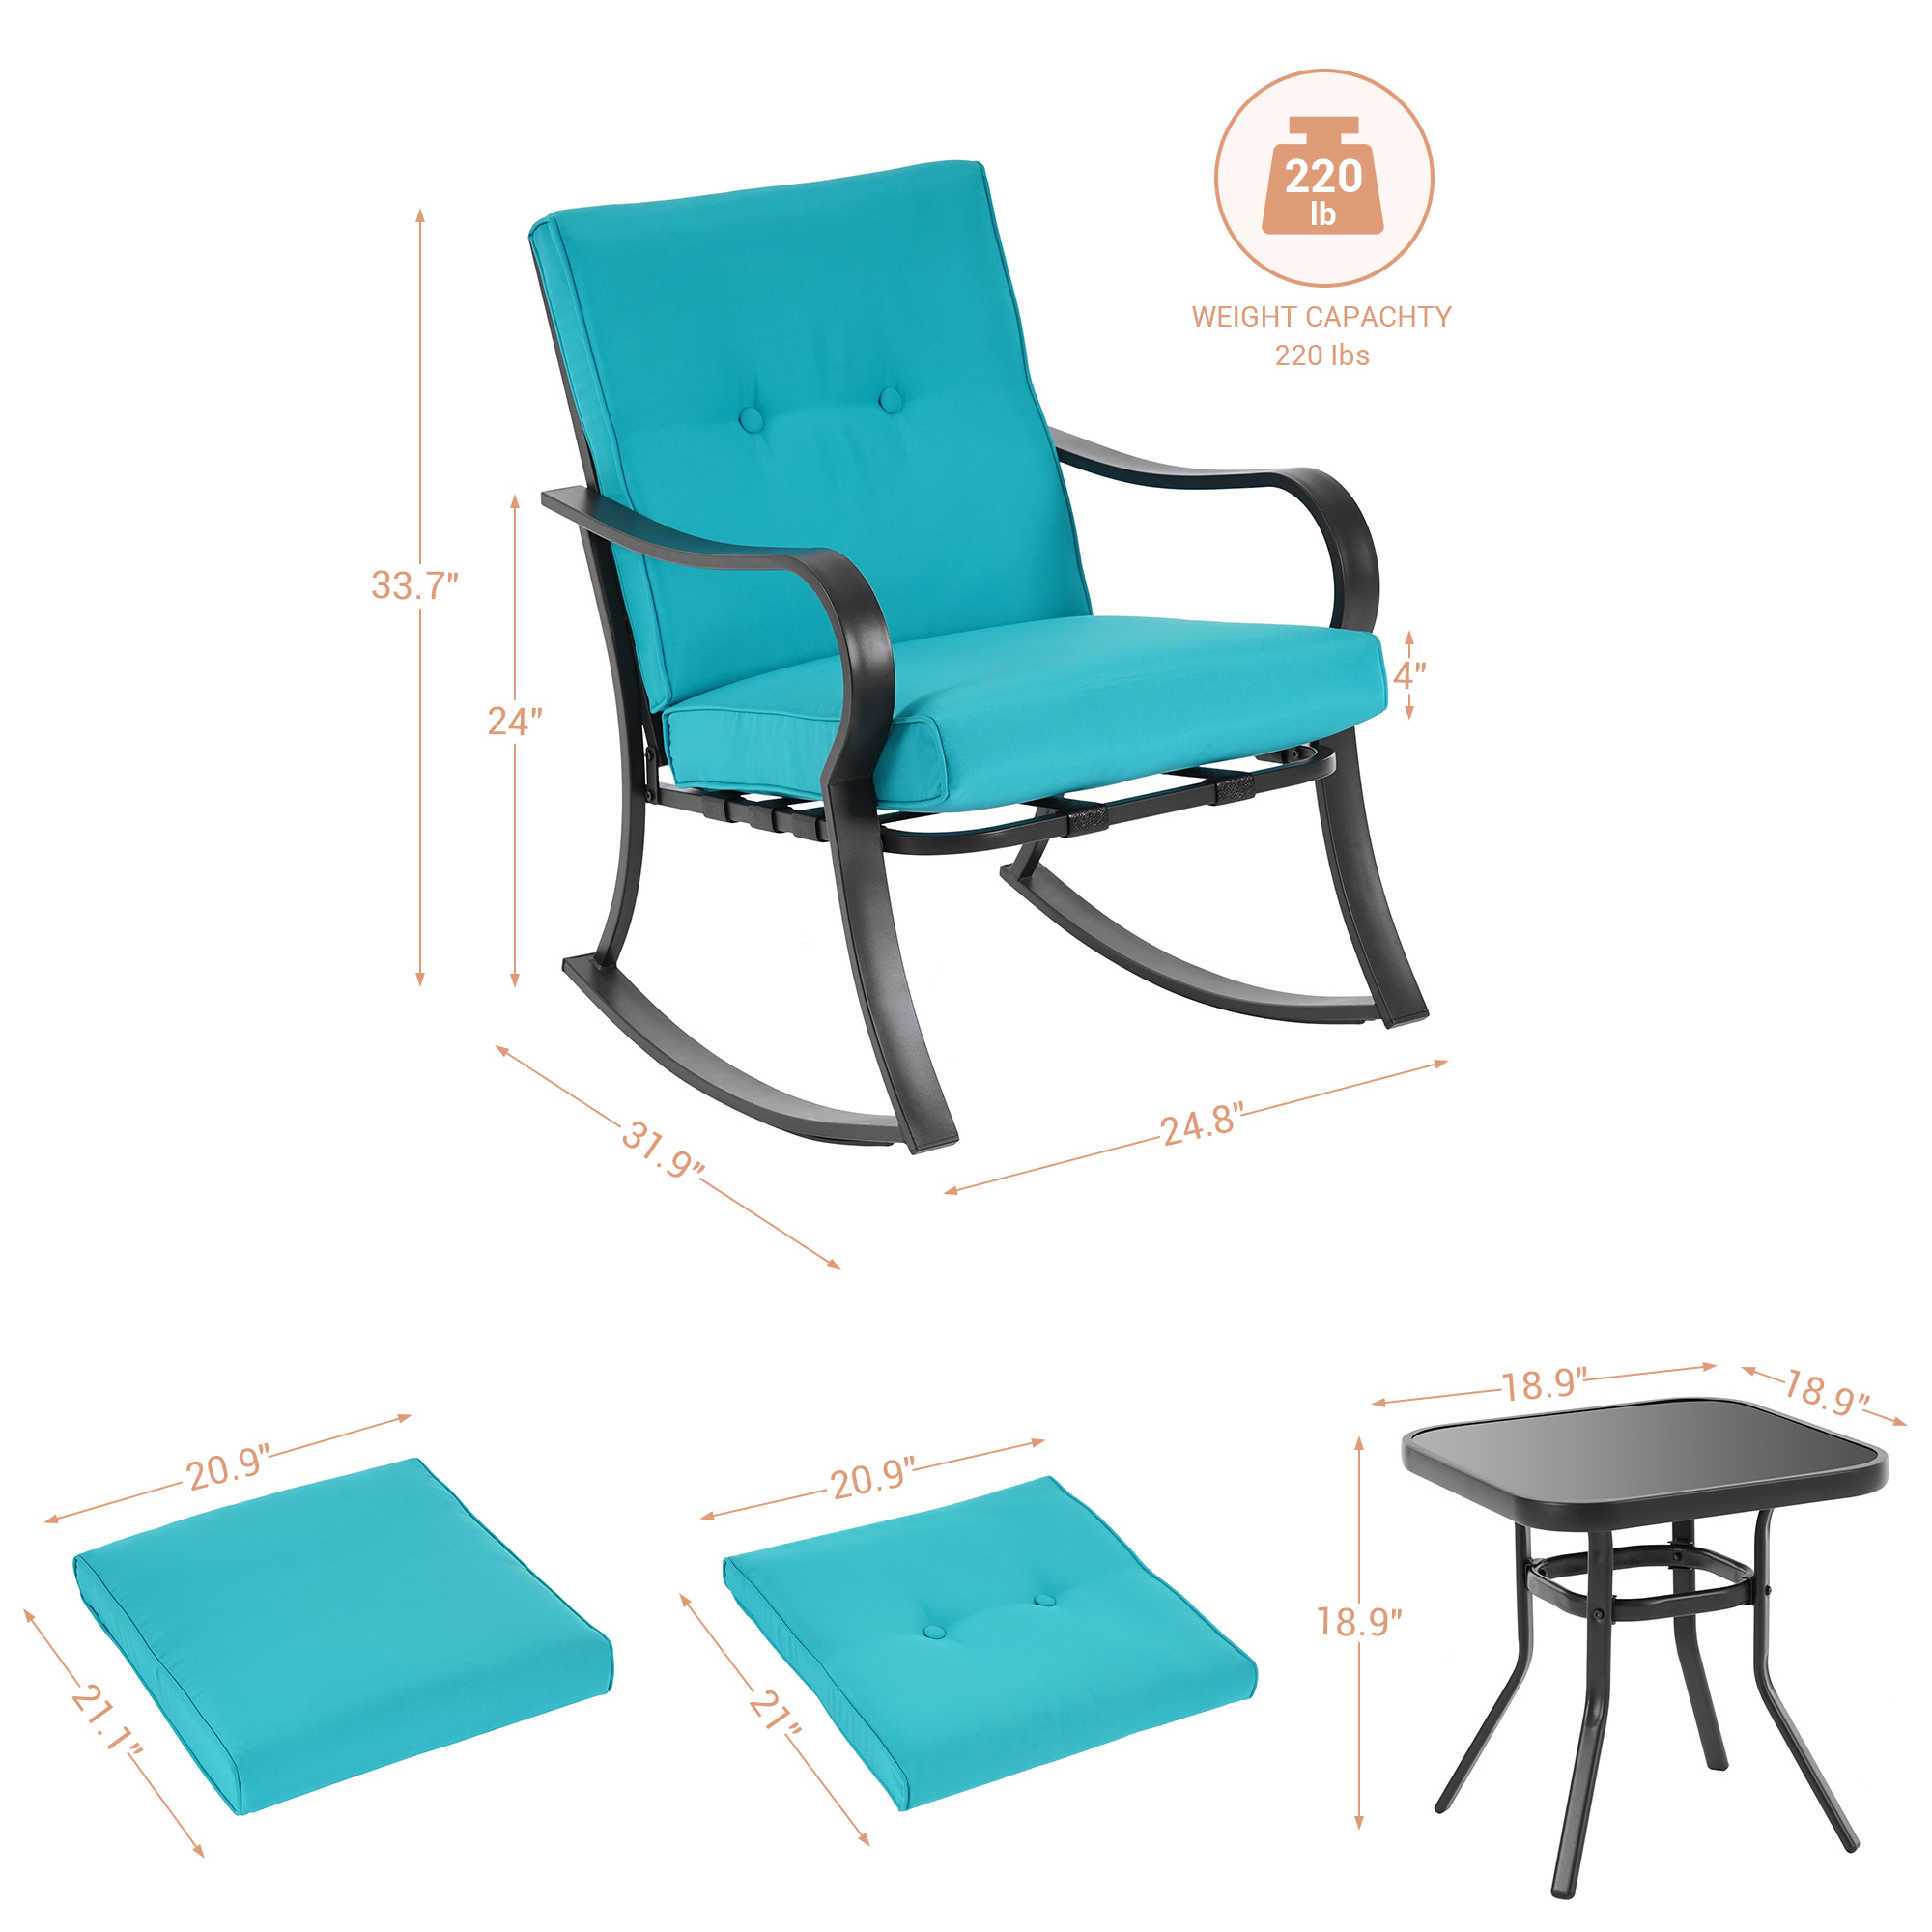 Outdoor Lounge Chair Courtyard Rocking Chair 3-Piece Steel Frame Outdoor Furniture Sets Thick Cushion Royal blue Double Armchair Deck Backyard Bistro Set - image 4 of 8